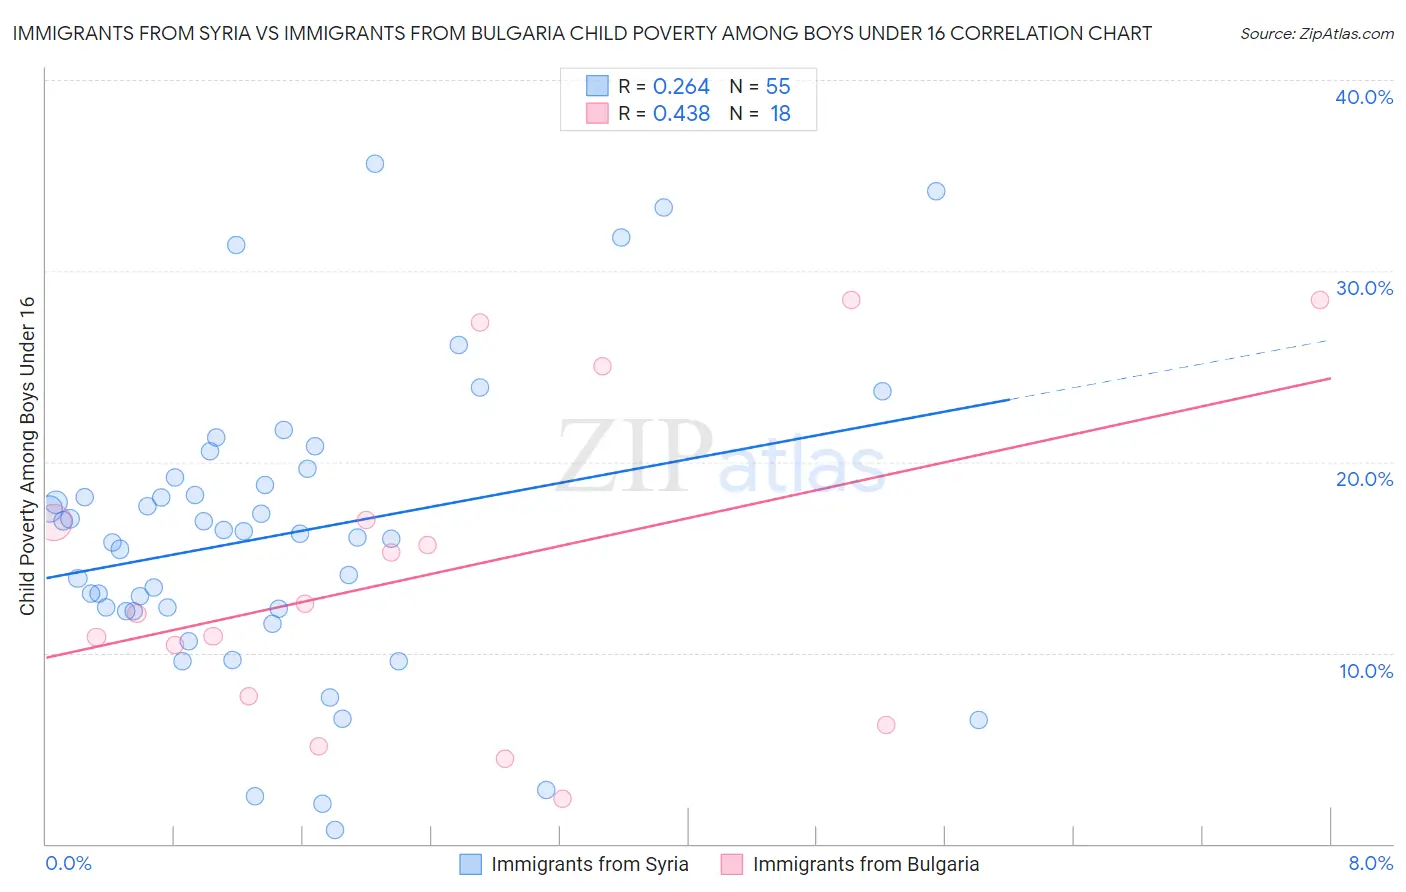 Immigrants from Syria vs Immigrants from Bulgaria Child Poverty Among Boys Under 16